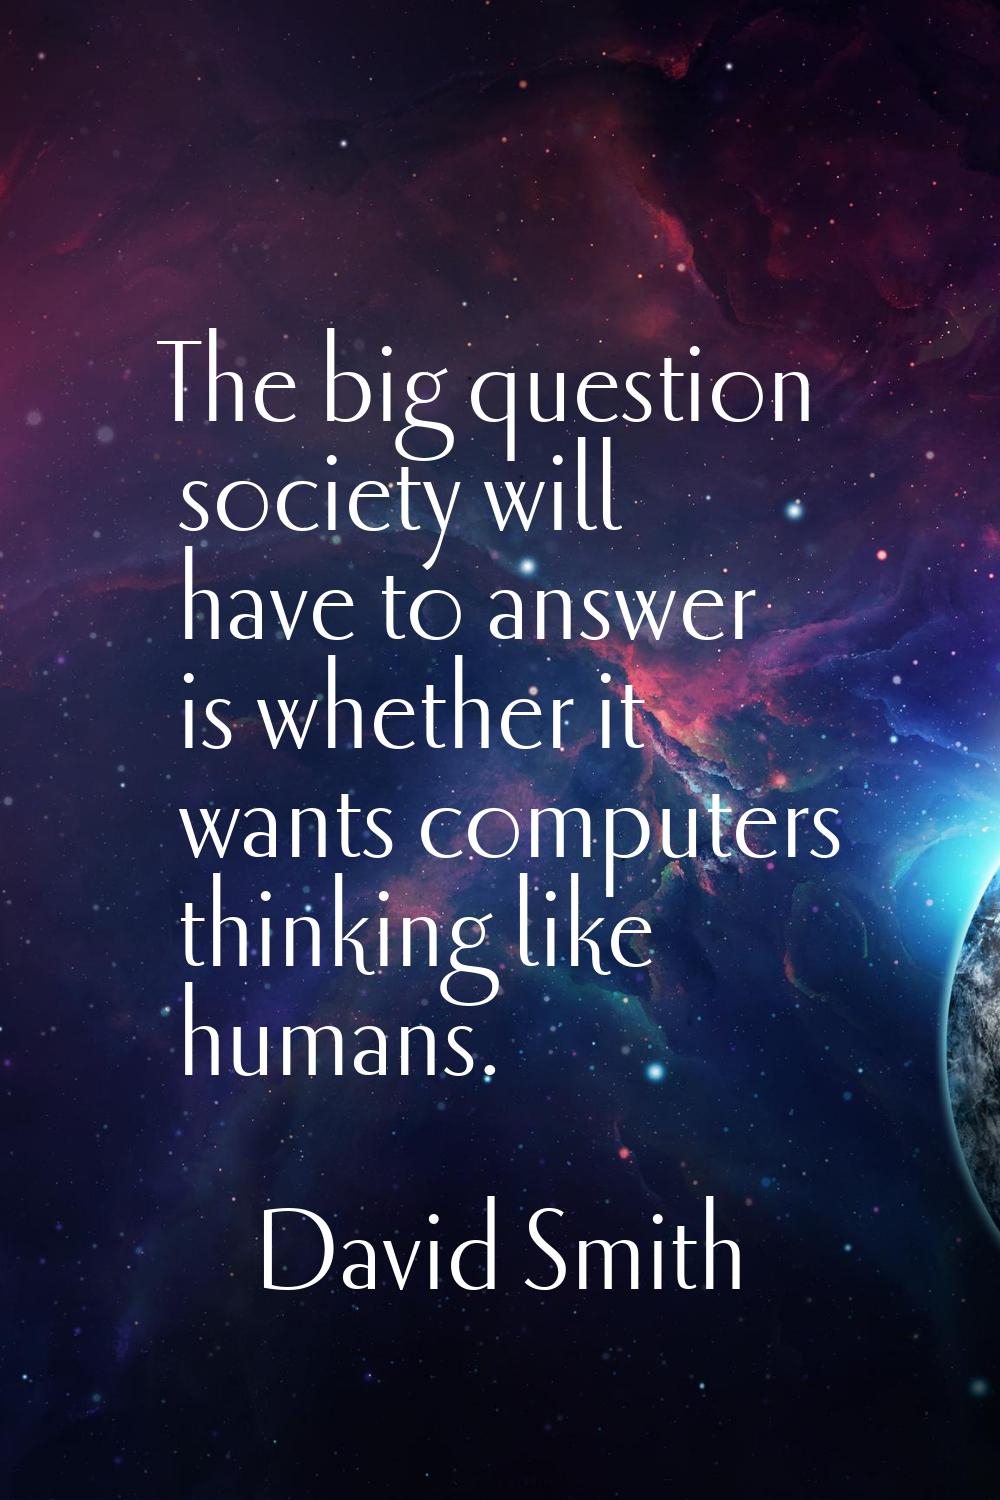 The big question society will have to answer is whether it wants computers thinking like humans.